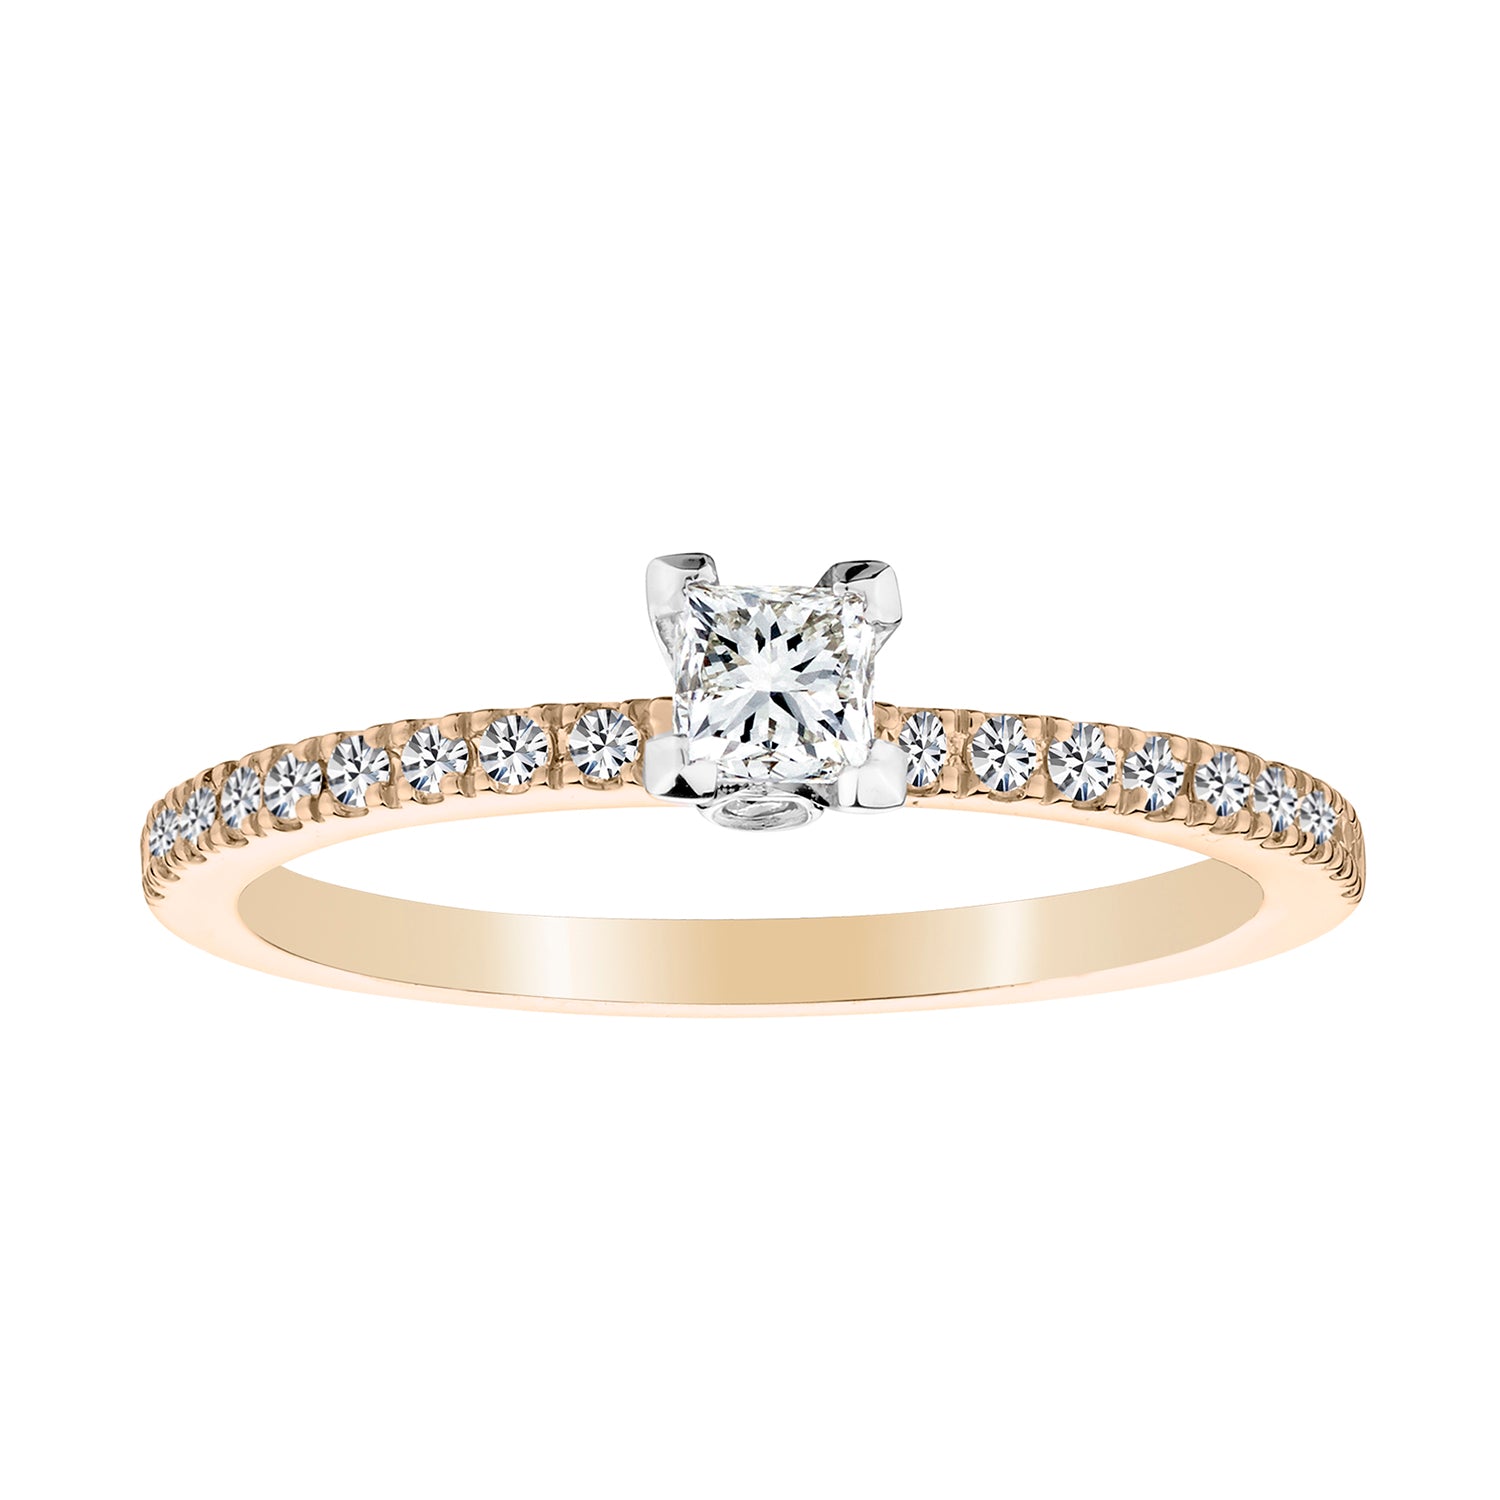 .40 Carat Canadian Princess Diamond Engagement Ring, 14kt Yellow Gold. Griffin Jewellery Designs